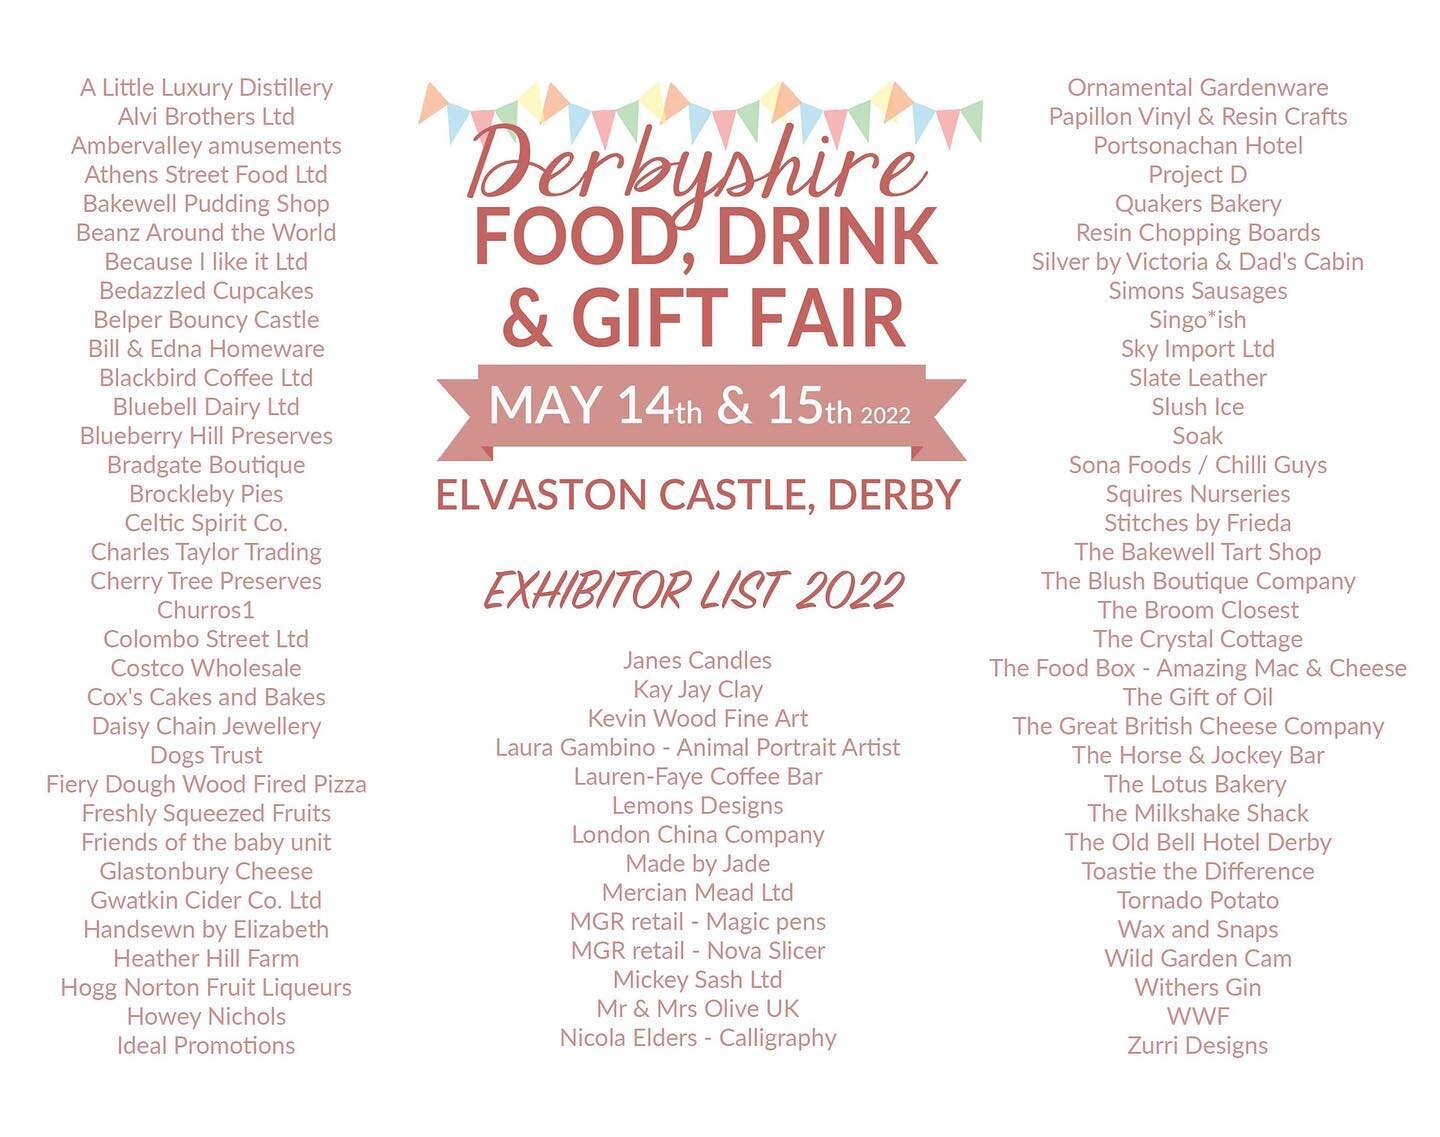 EXHIBITOR LIST 2022 &hellip; Derbyshire Food, Drink &amp; Gift Fair. We have a great line up for you for this weekend. Food &amp; Drink Producers. Craft, Gift &amp; Homeware. Sweet &amp; Savoury Street Food. Main Bar. Children&rsquo;s Amusements &amp